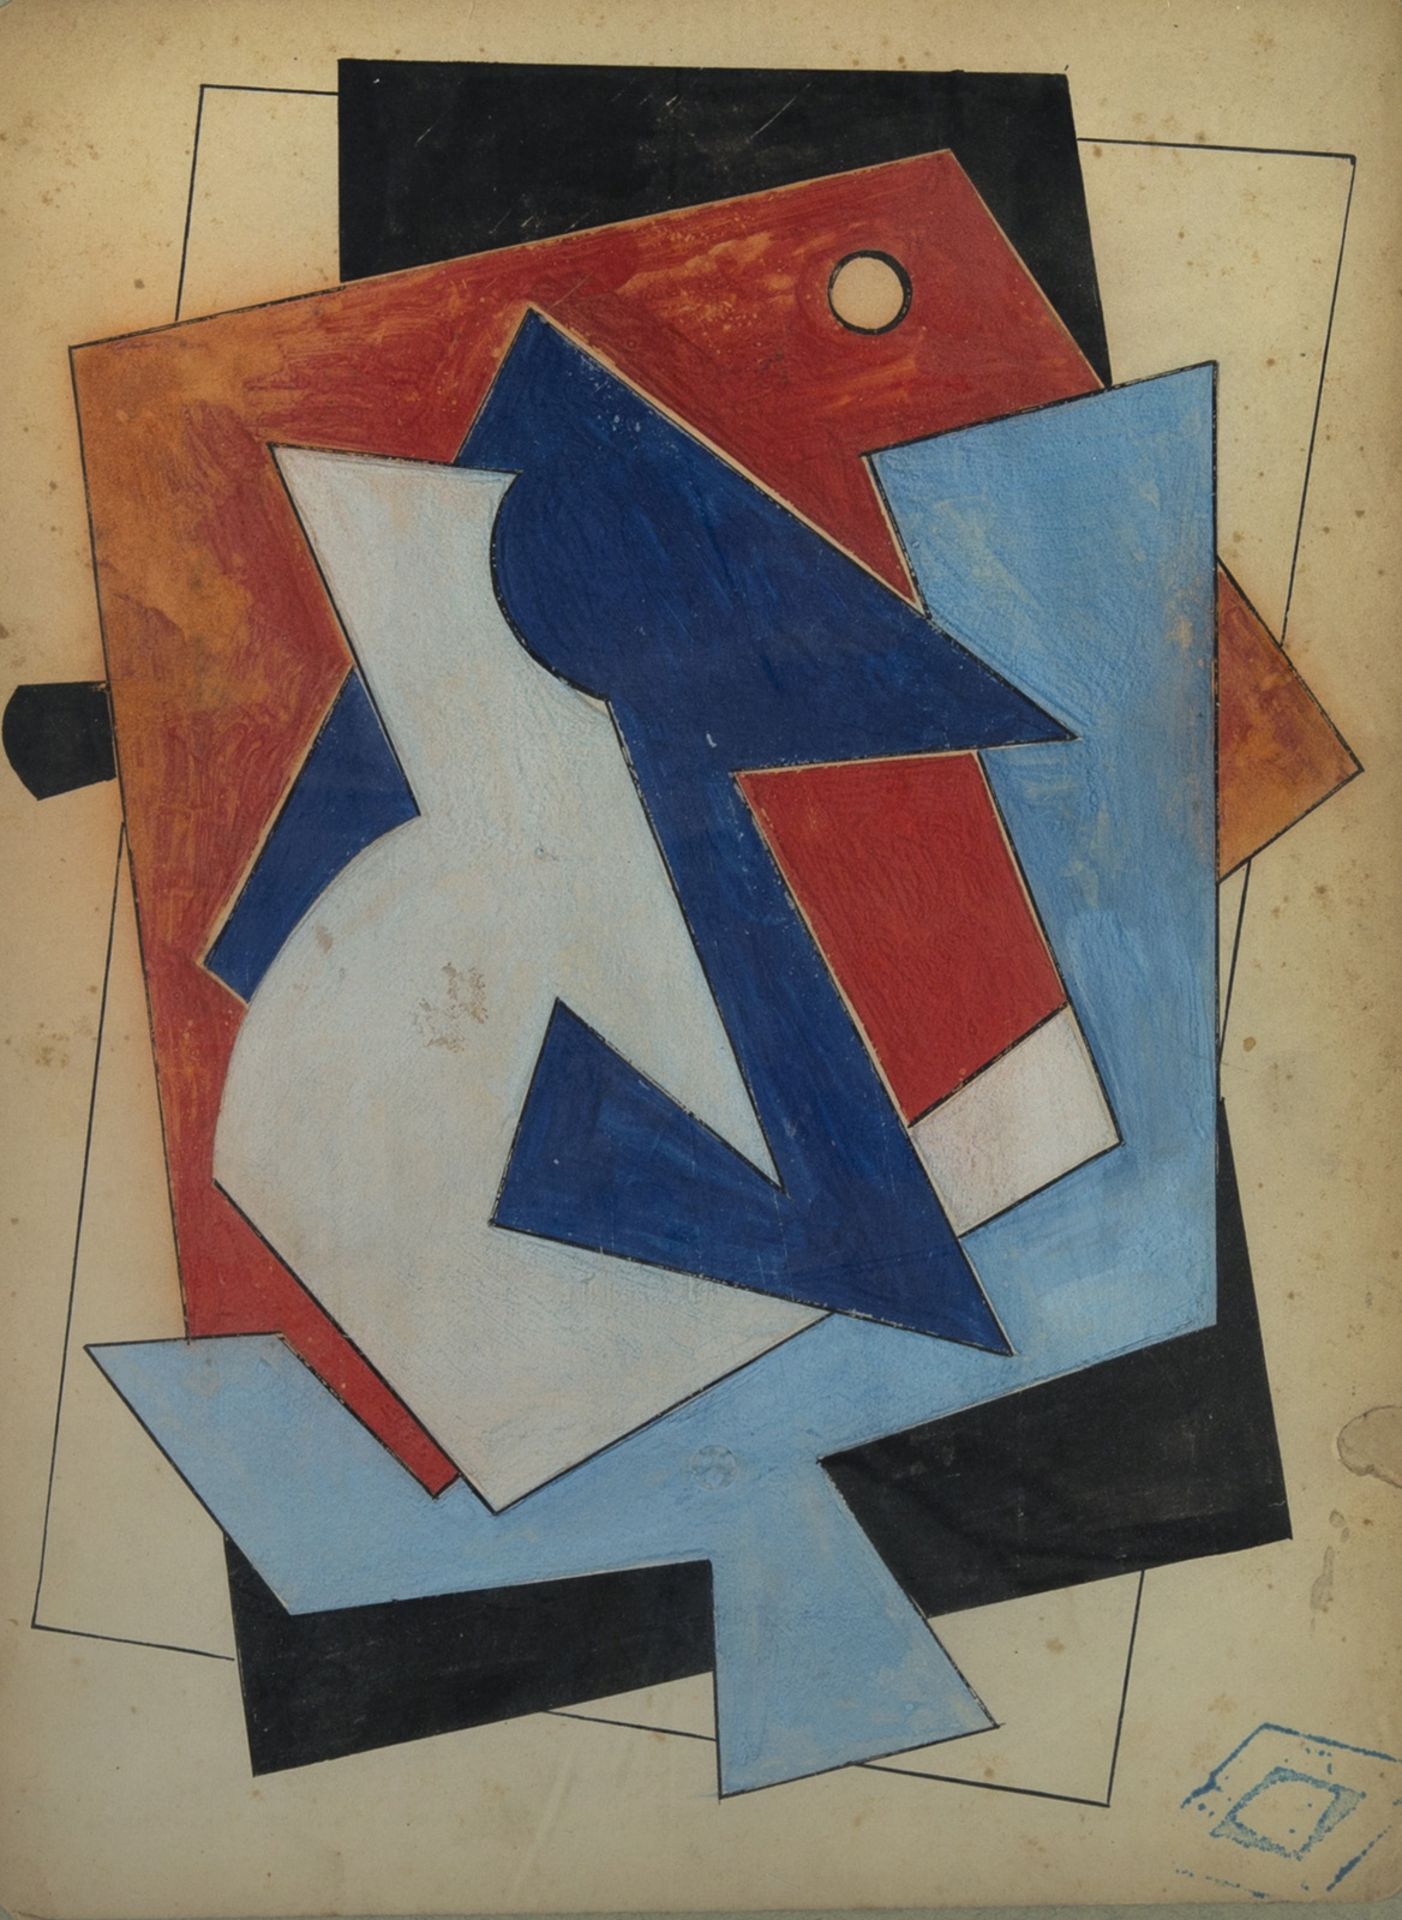 RUSSIAN, FIRST HALF OF 20TH CENTURYSuprematist Composition, gouache and ink on paper31.5 x 23 cm (12